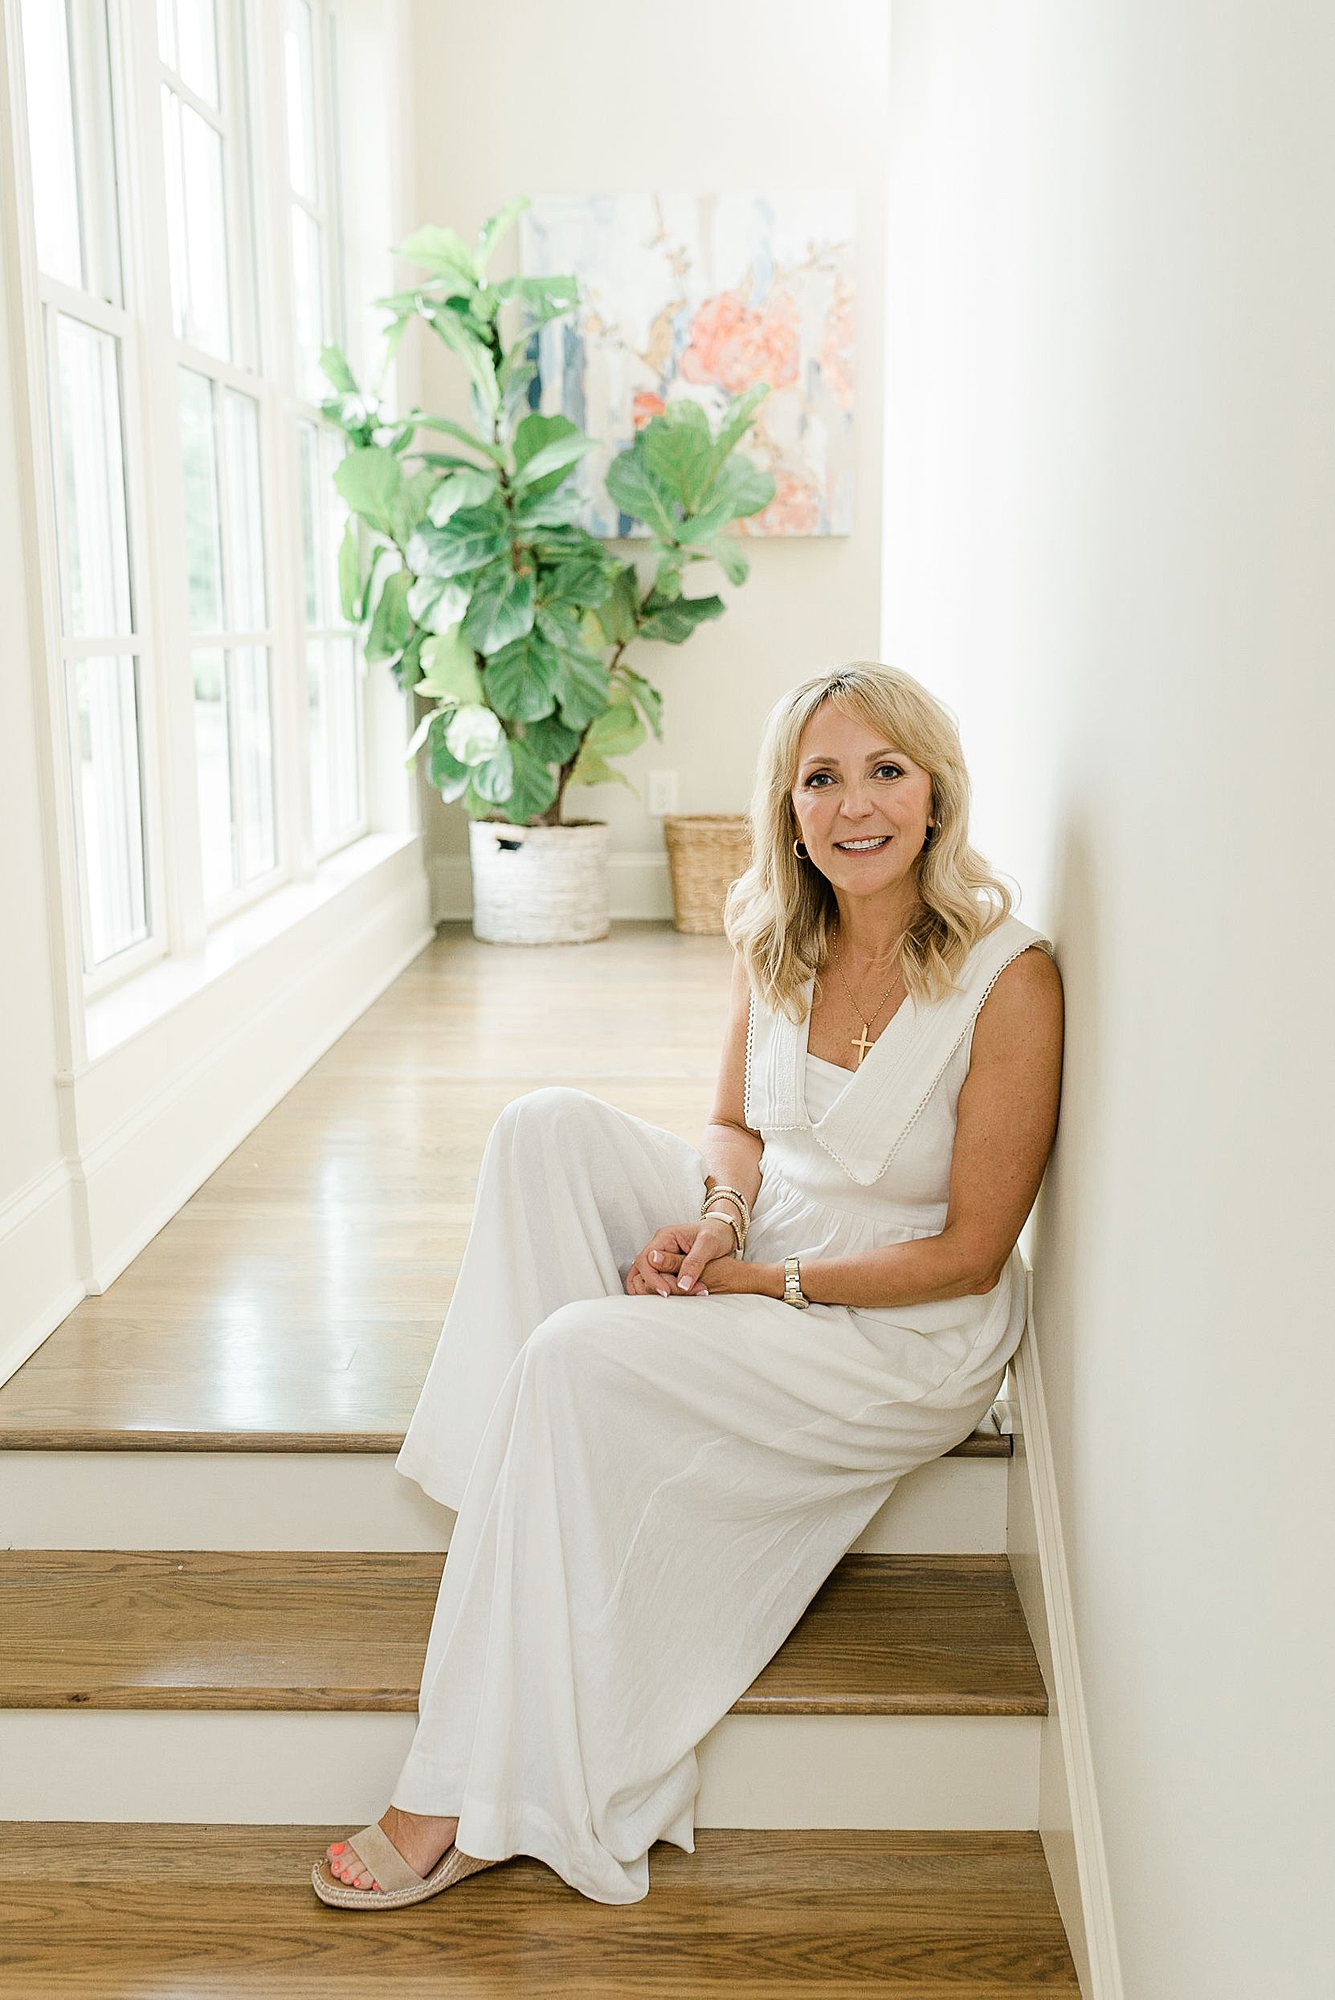 a_middle_aged_woman_is_taking_her_Nashville_branding_photos_for_her_real_estate_business_she_is_wearing_a_white_dress